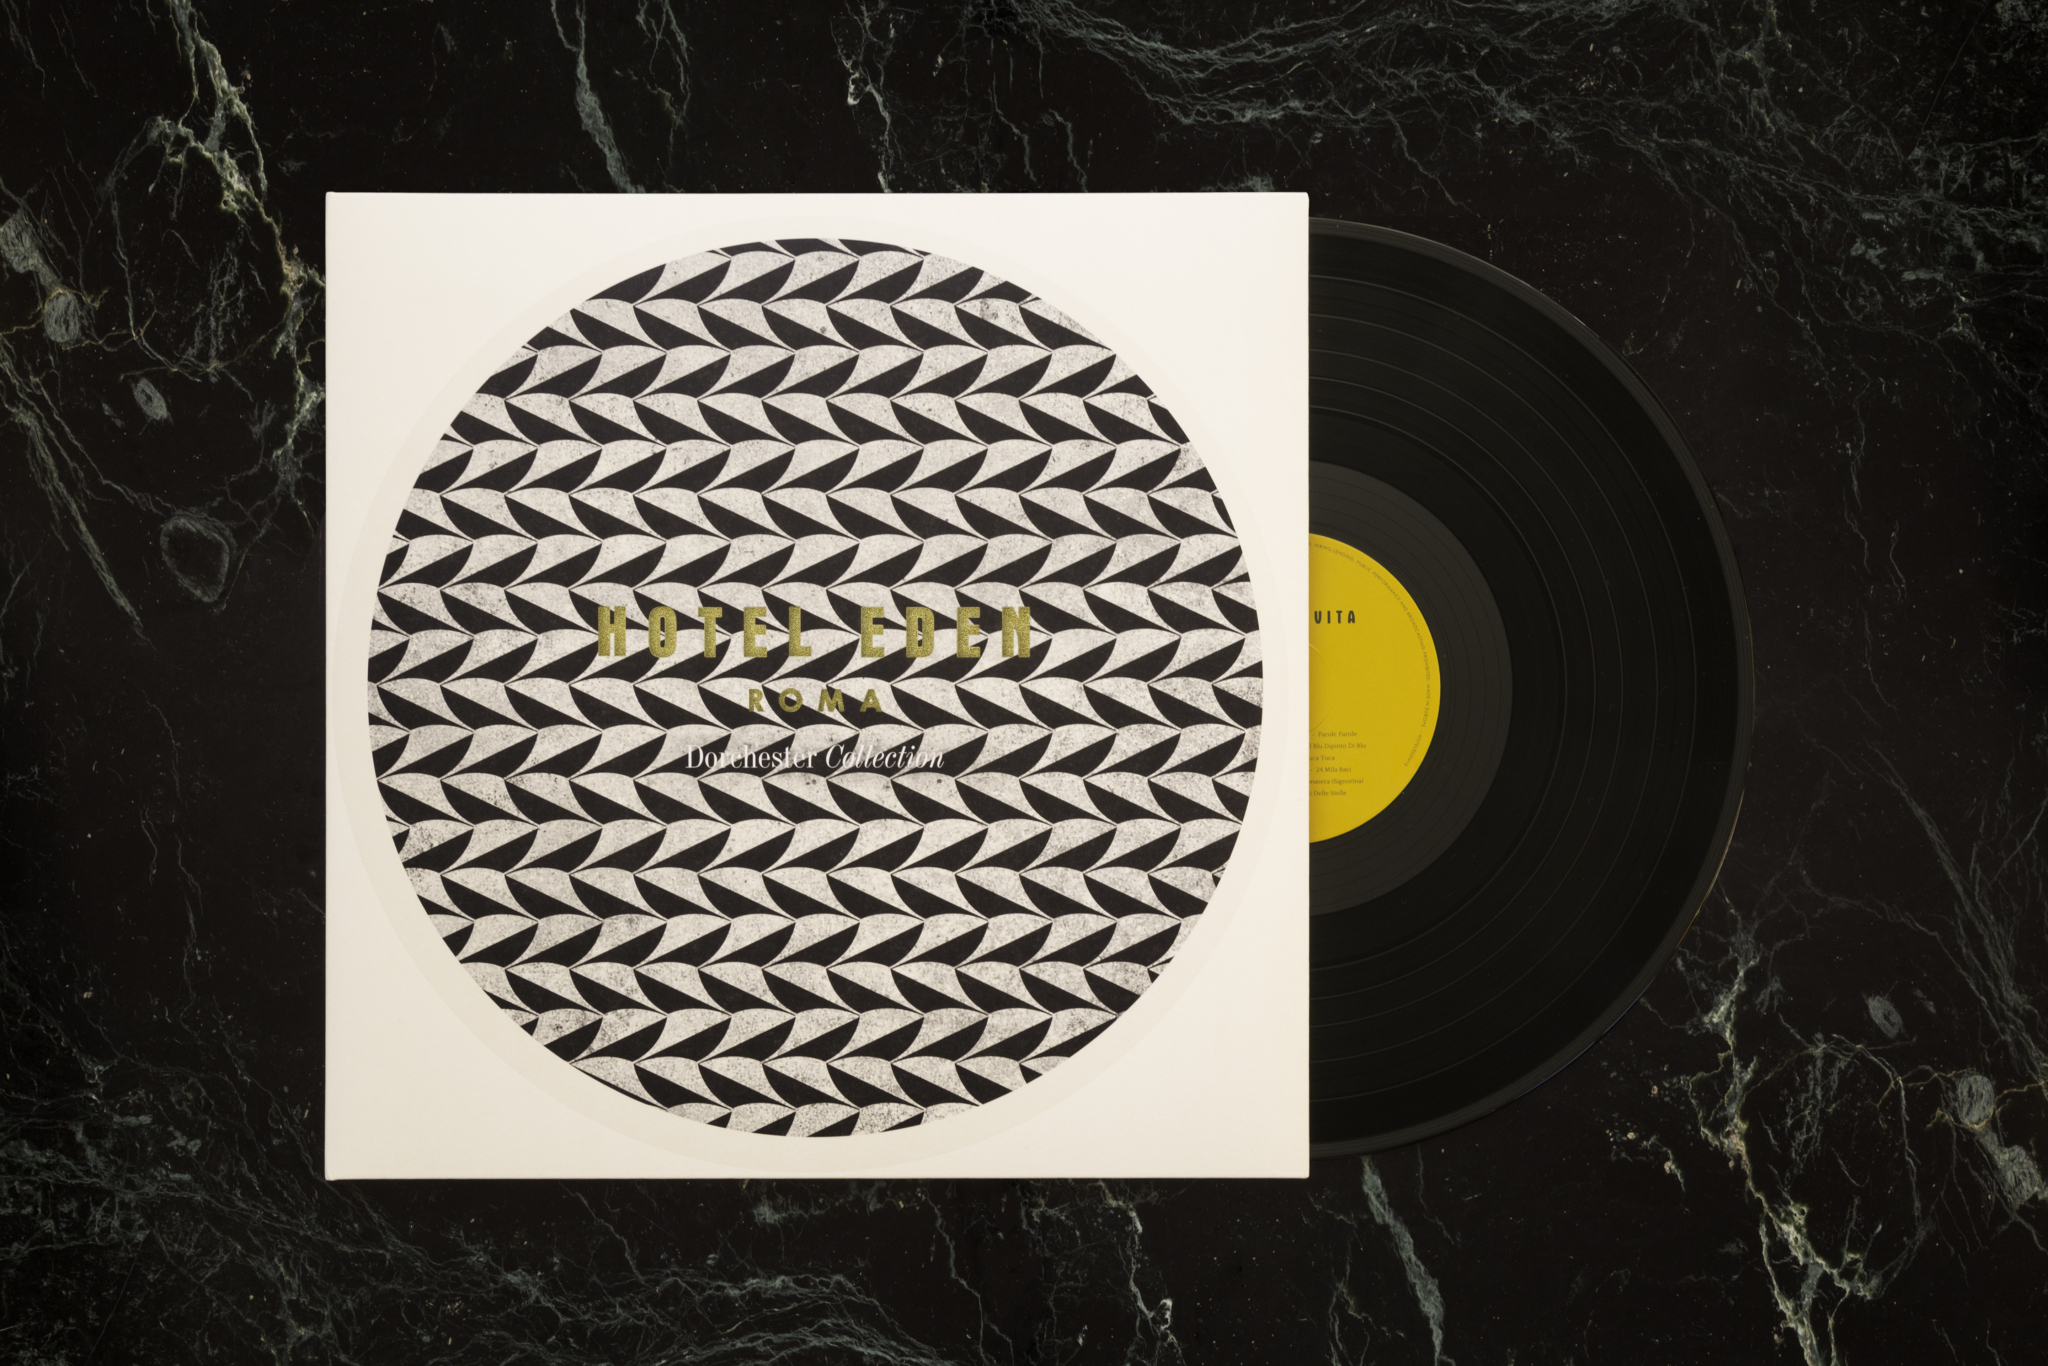 Vinyl record with illustrated cover, featured as part of a branding project for Hotel Eden by & Smith.